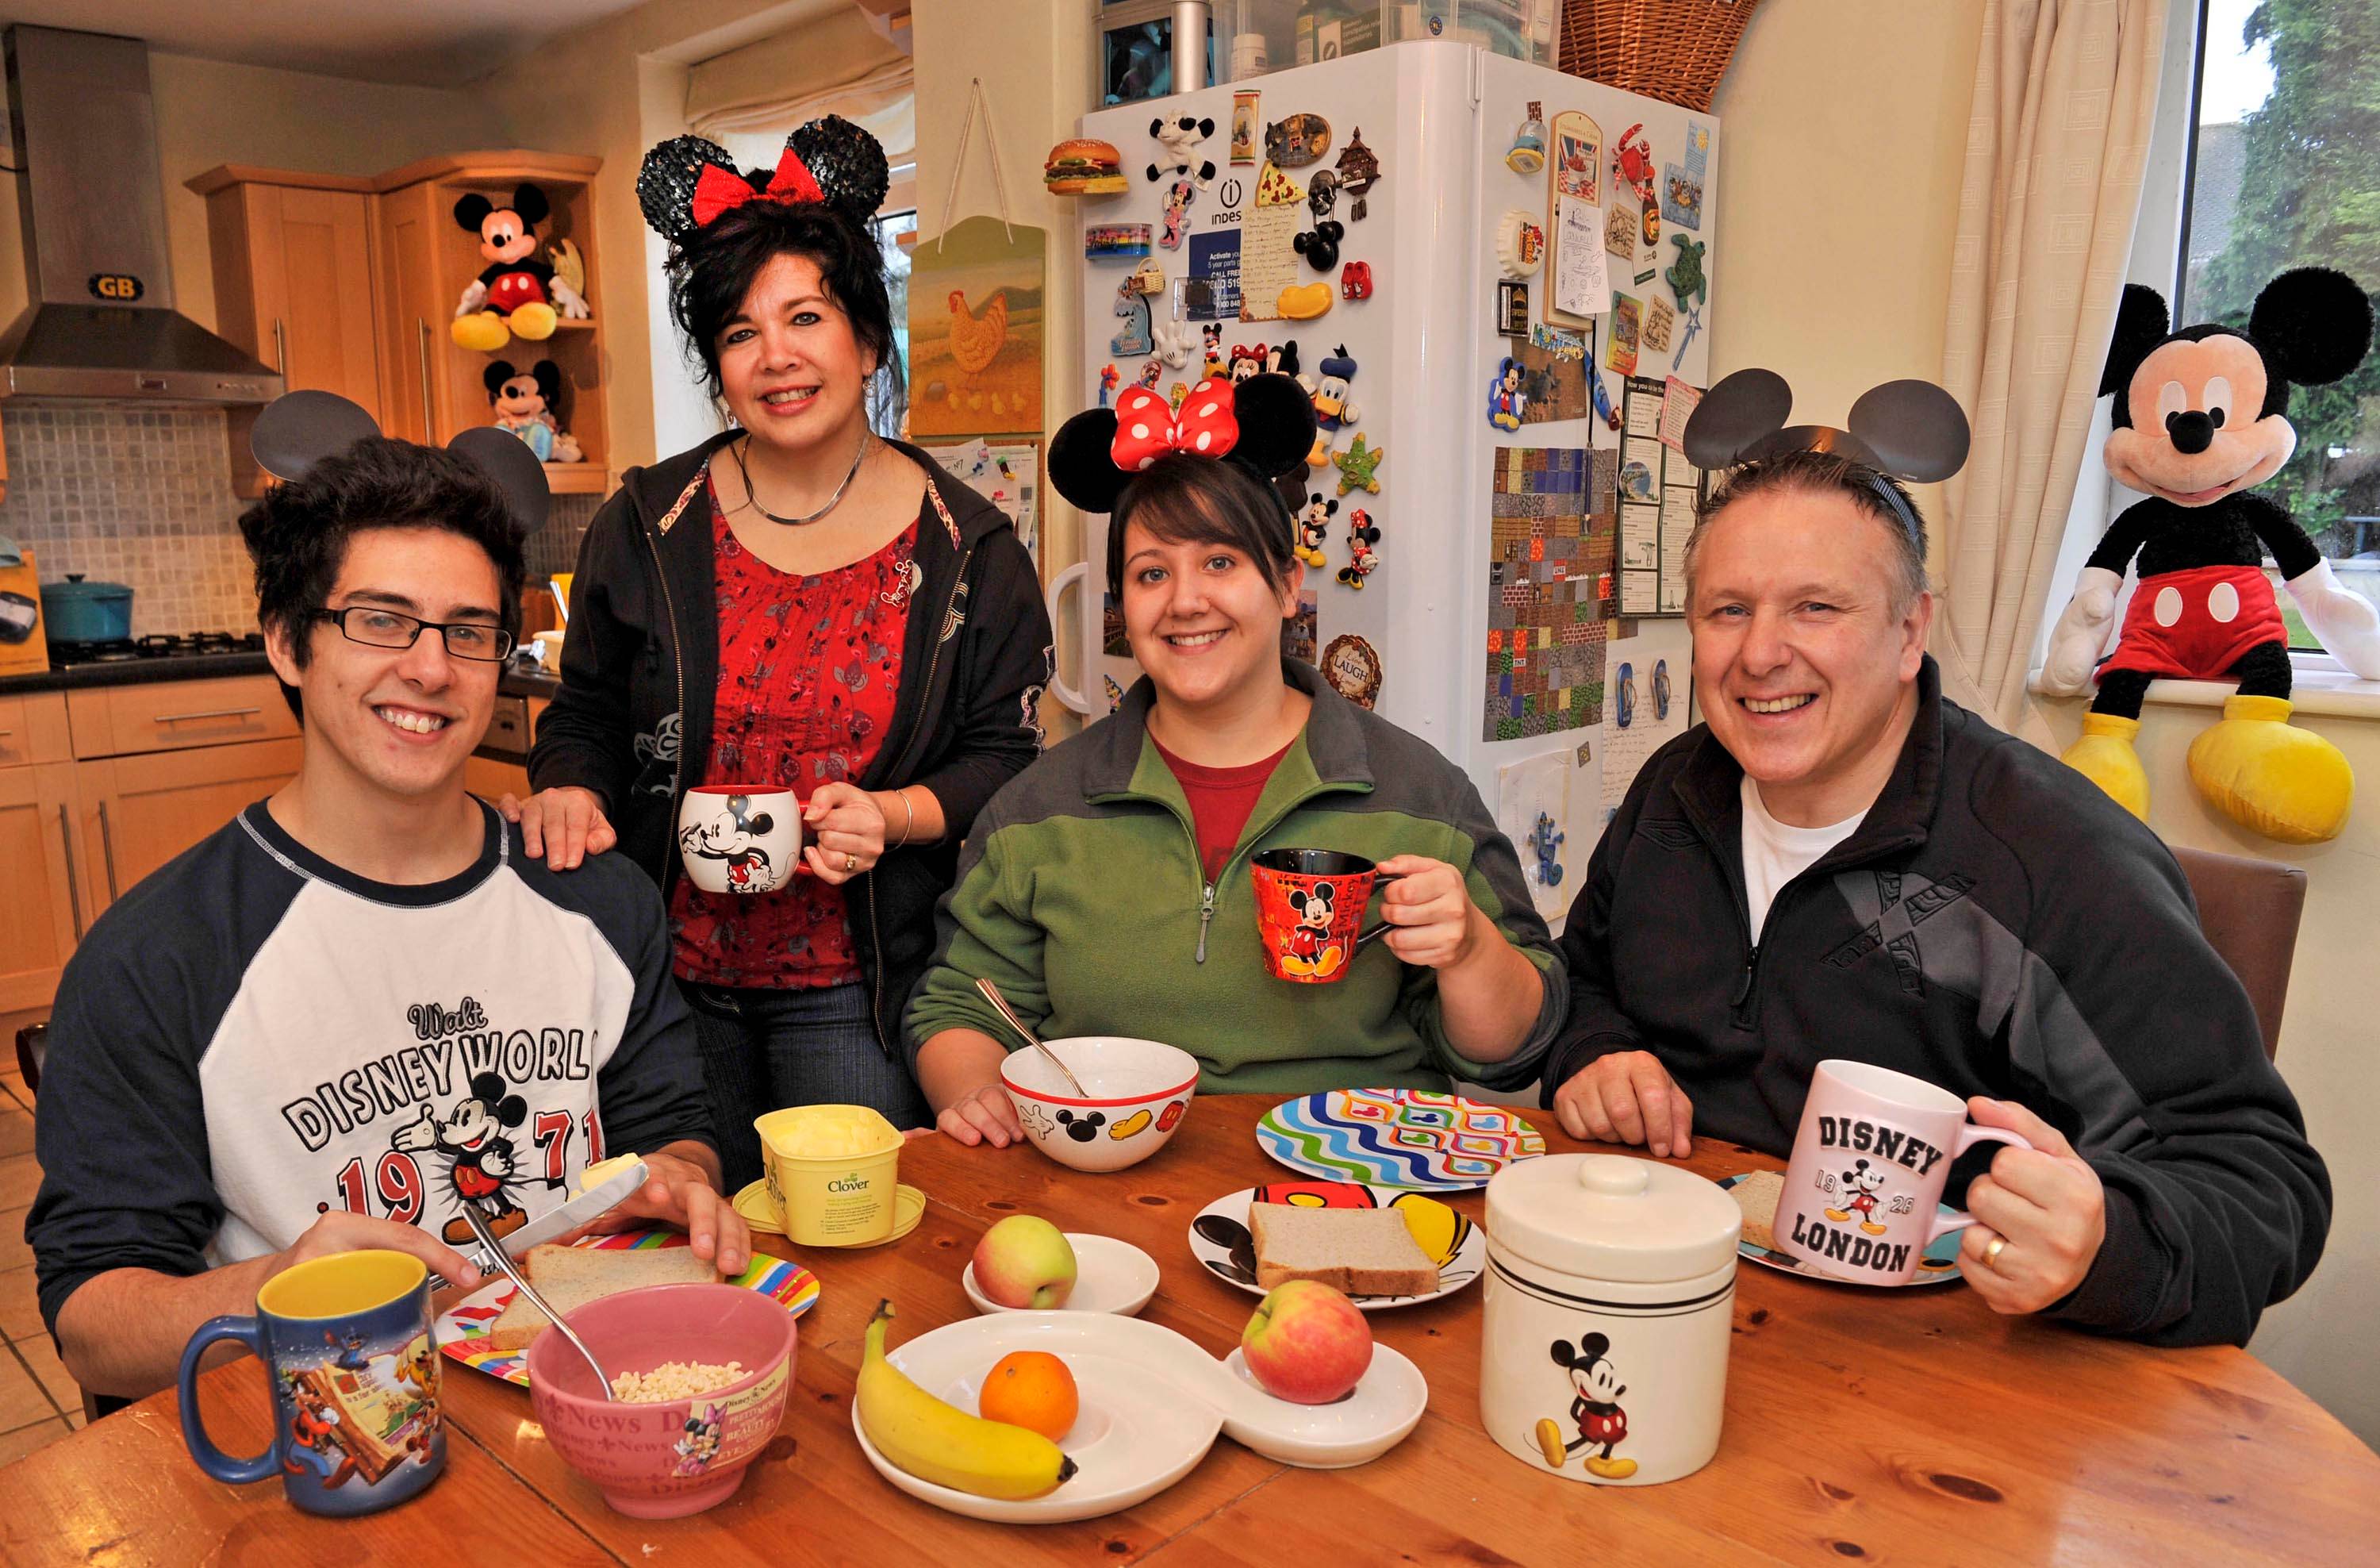 The world's first ever 'Walt Disney World Family' unveiled